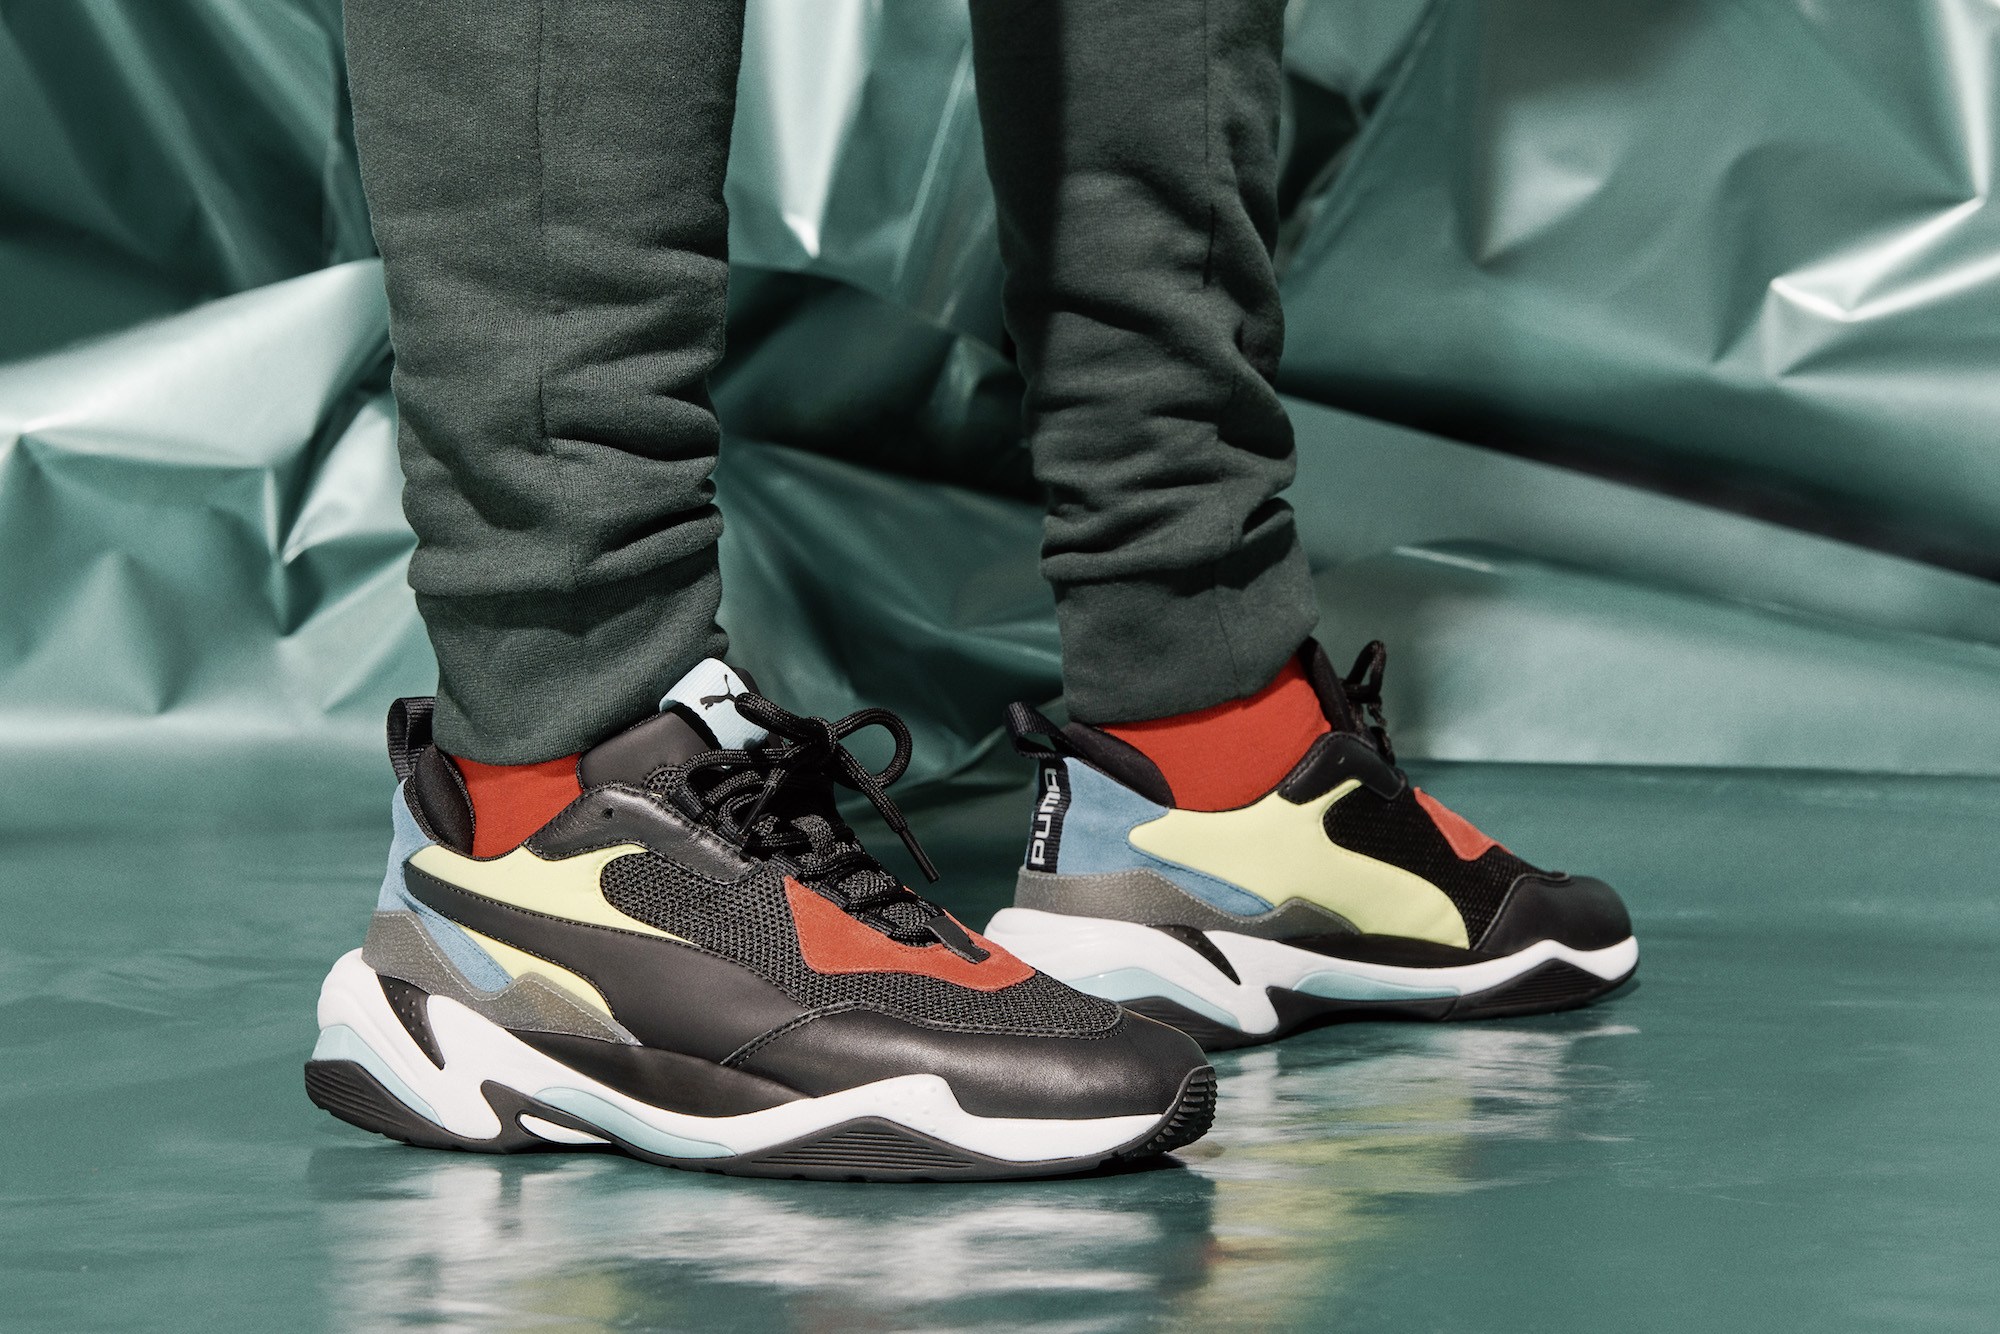 puma thunder spectra Archives - WearTesters